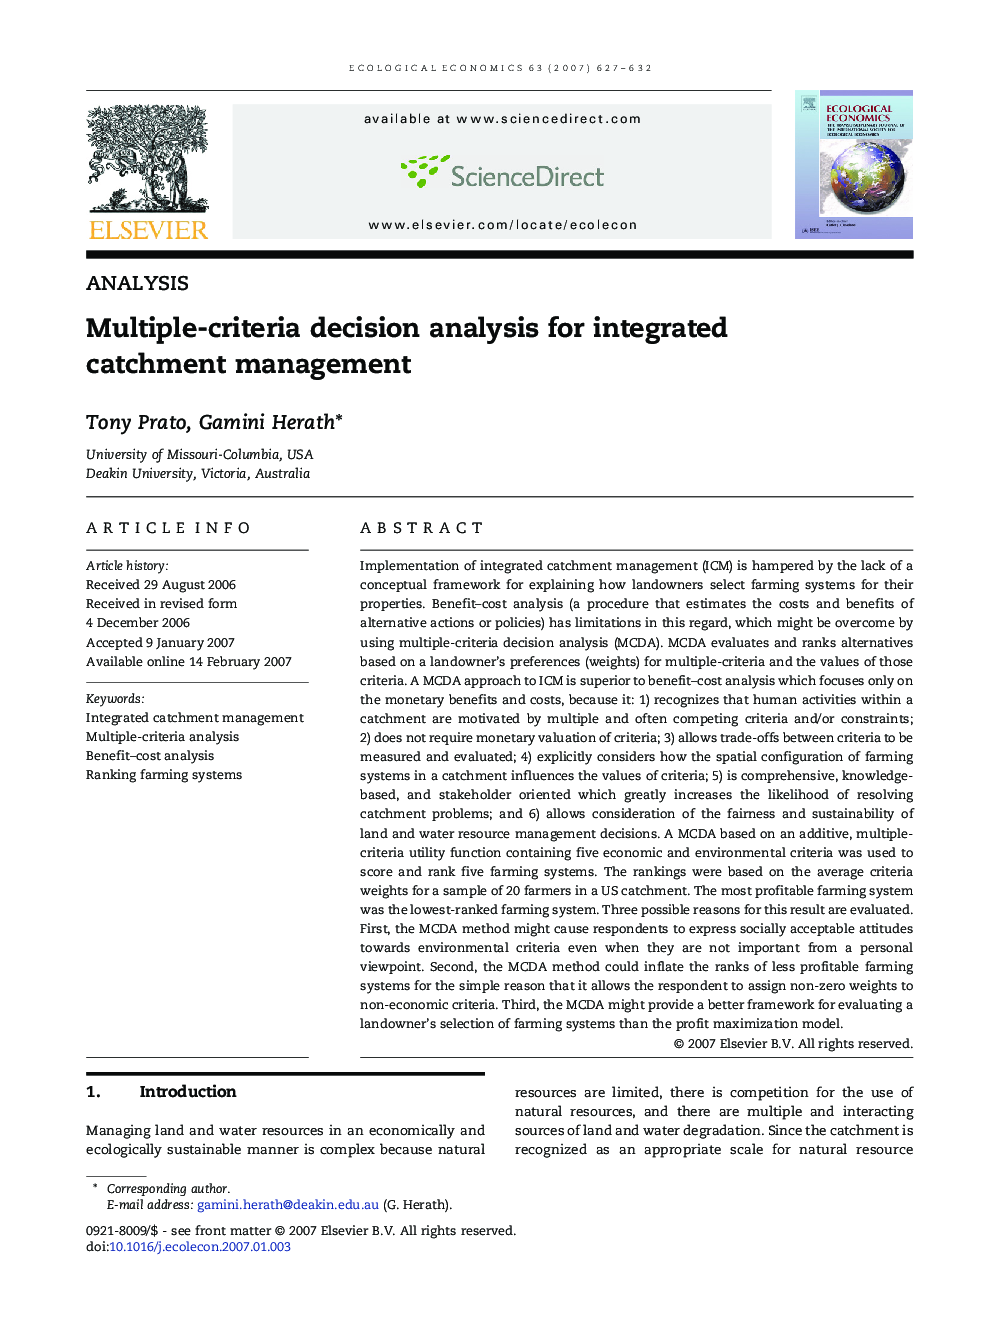 Multiple-criteria decision analysis for integrated catchment management